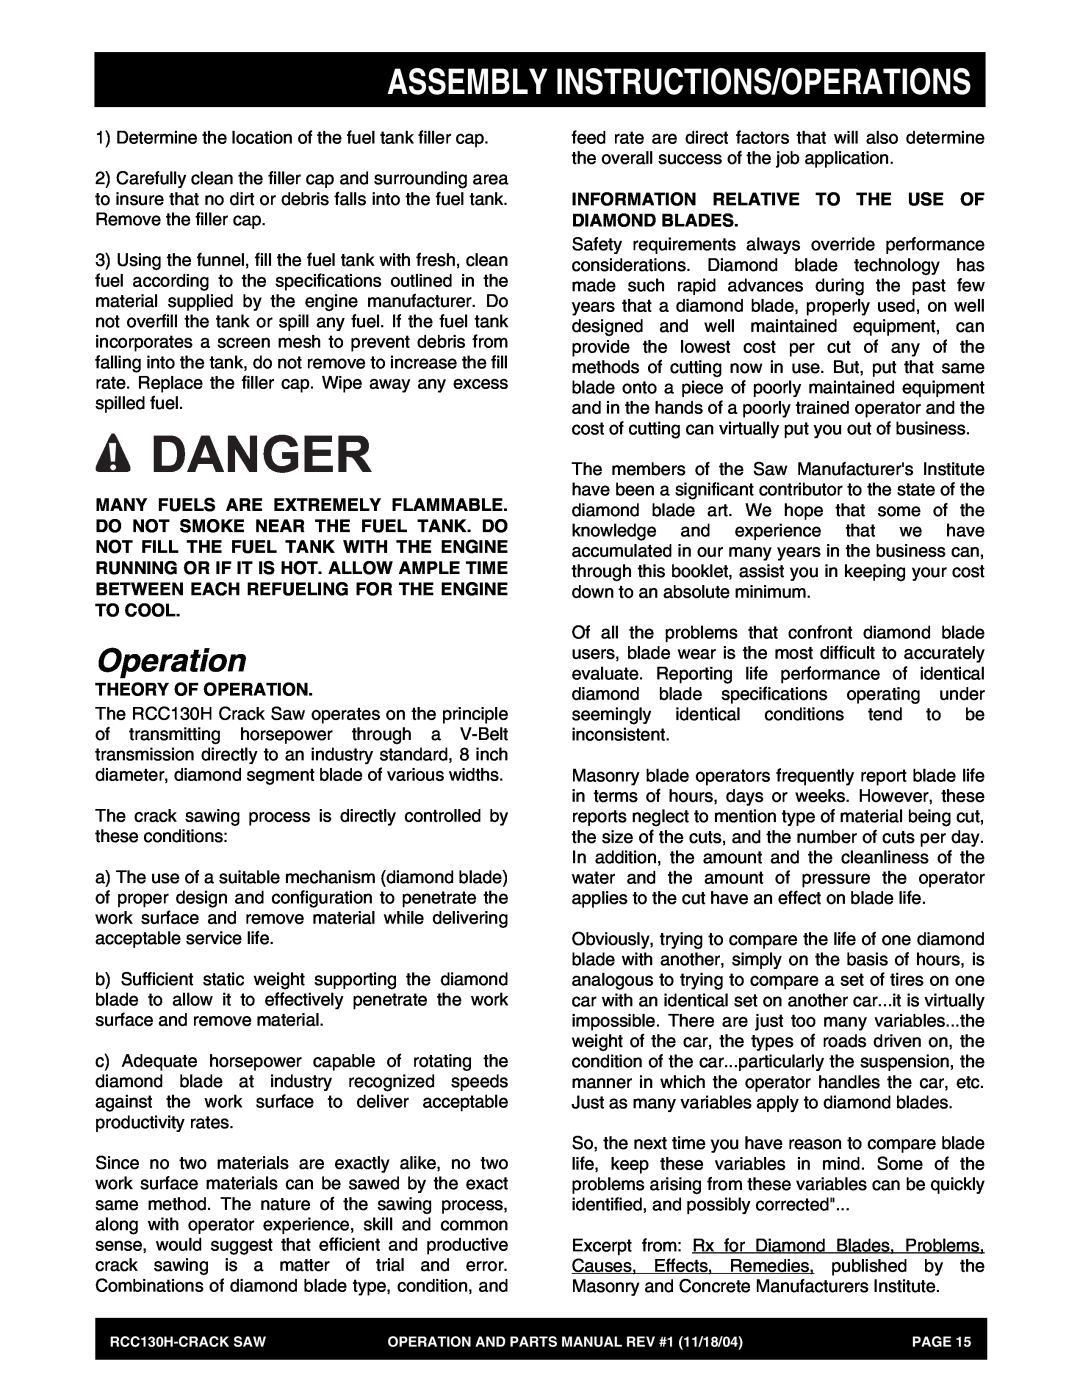 Stow RCC130H manual Danger, Assembly Instructions/Operations, Theory Of Operation 